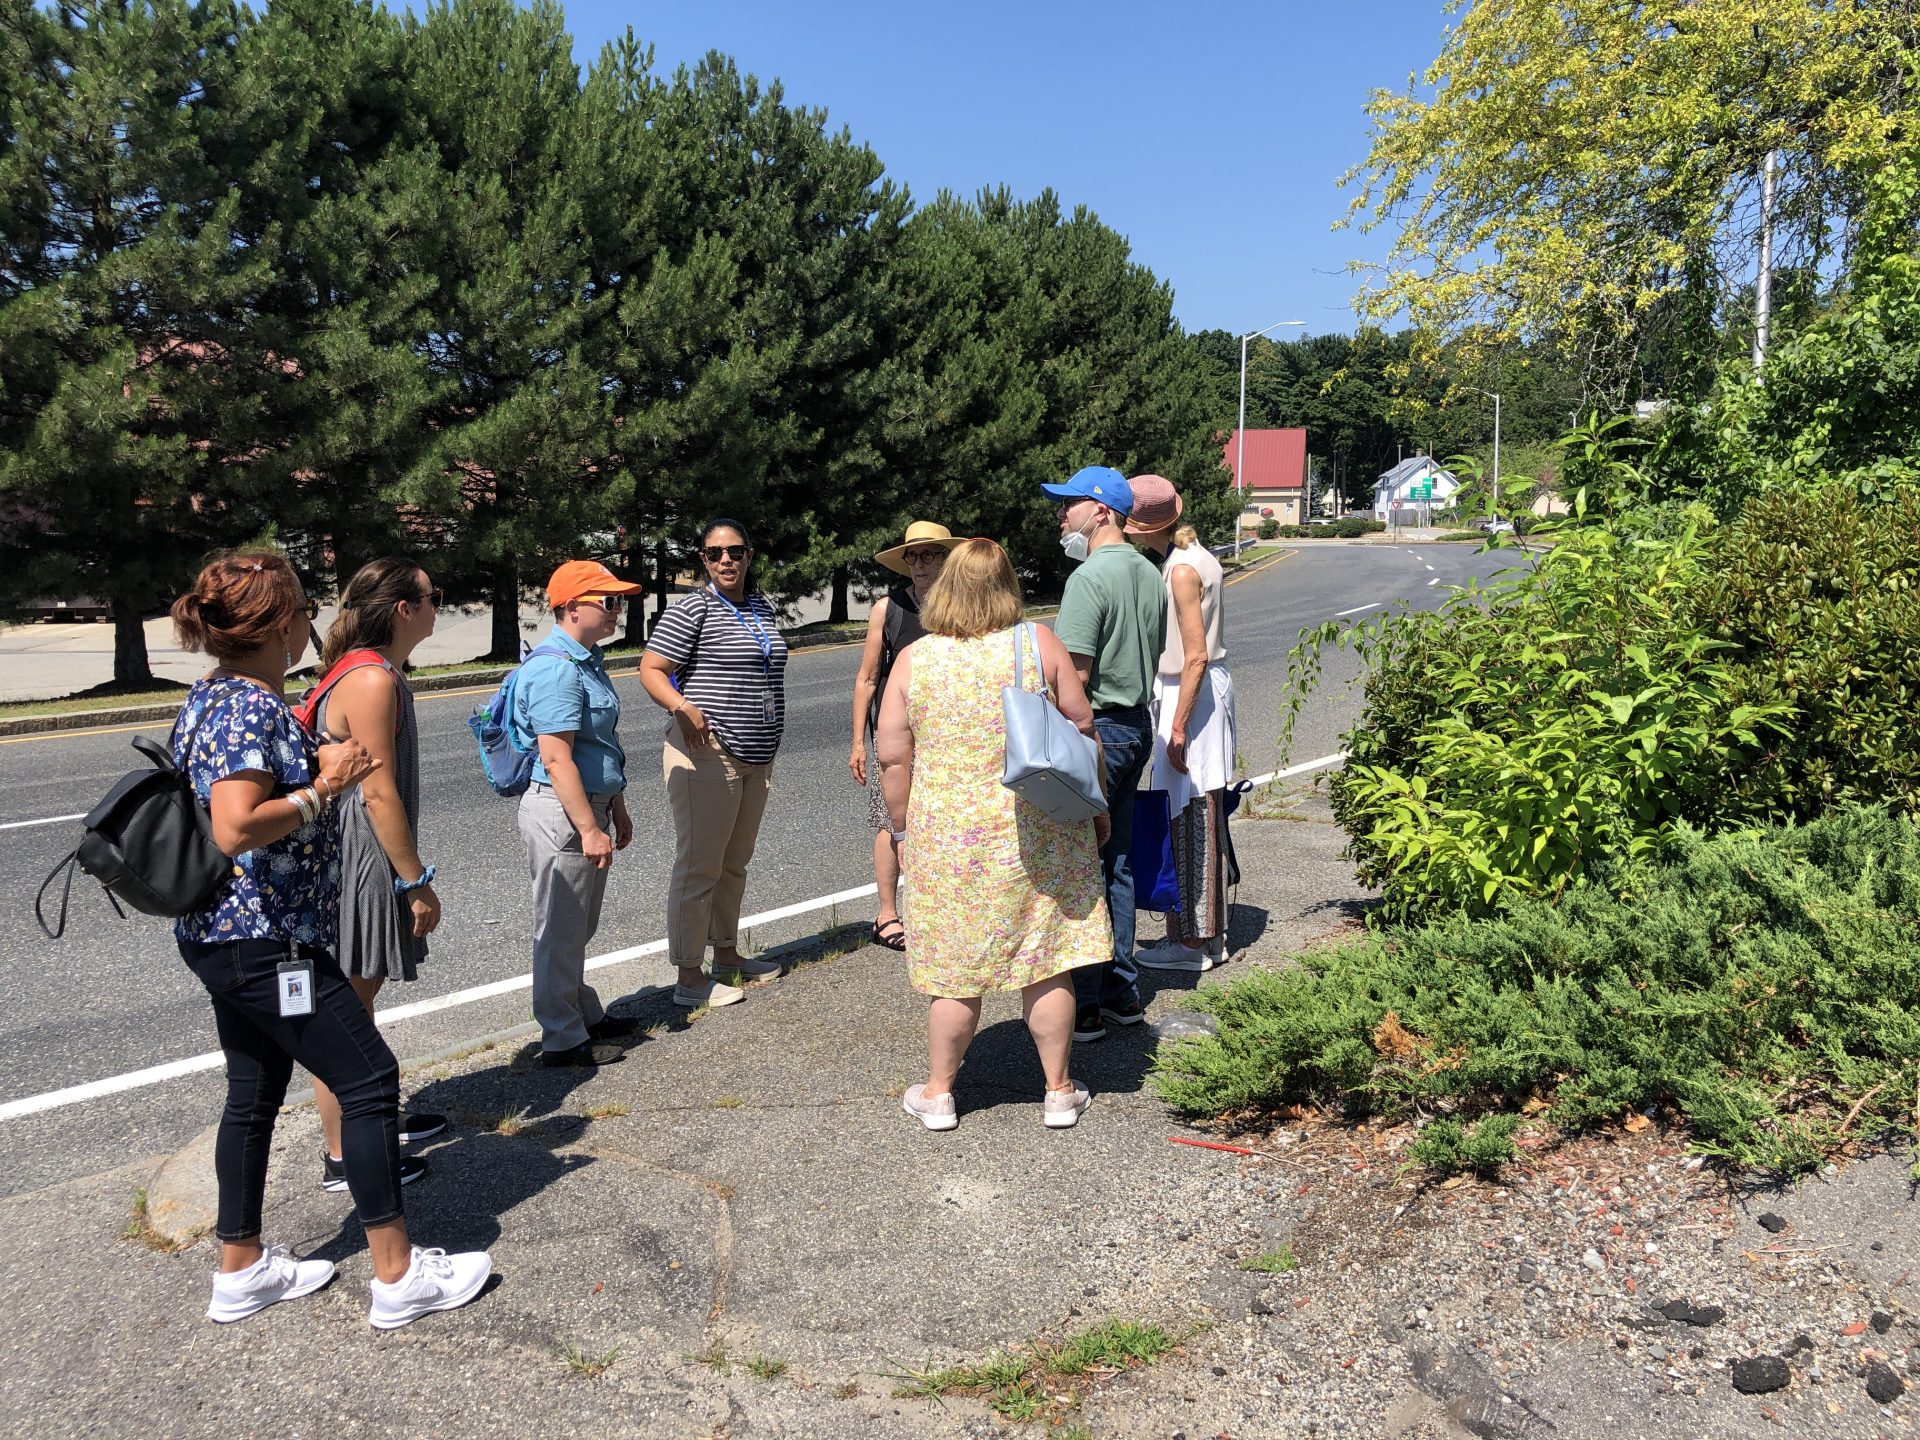 A group of people stand on a crumbling sidewalk next to roadway. Overgrown shrubs block the sidewalk further down the road.